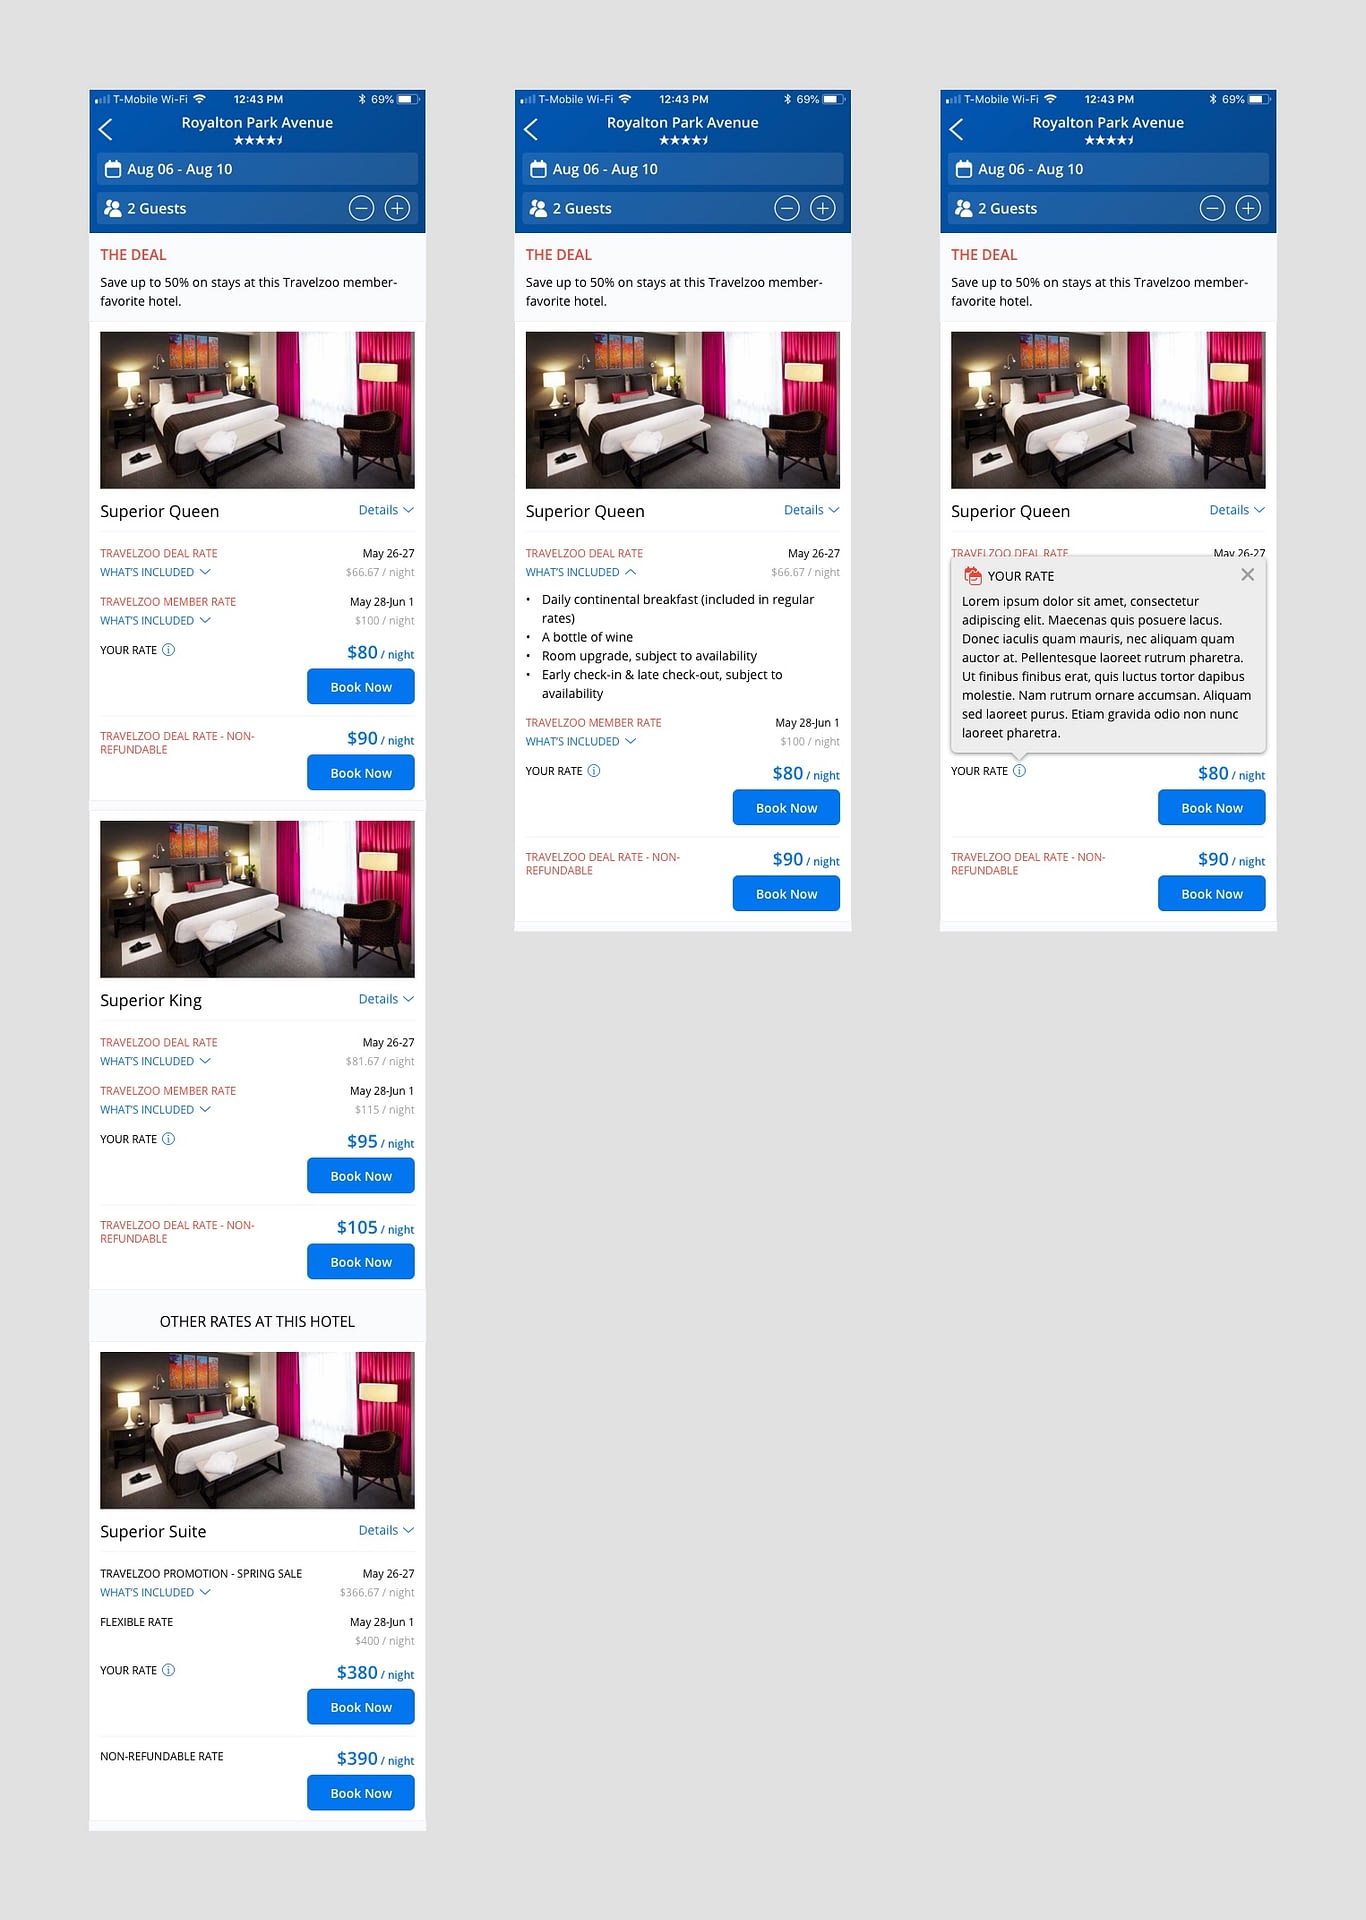 Hotel rooms-and-rates UI design (final) mobile app